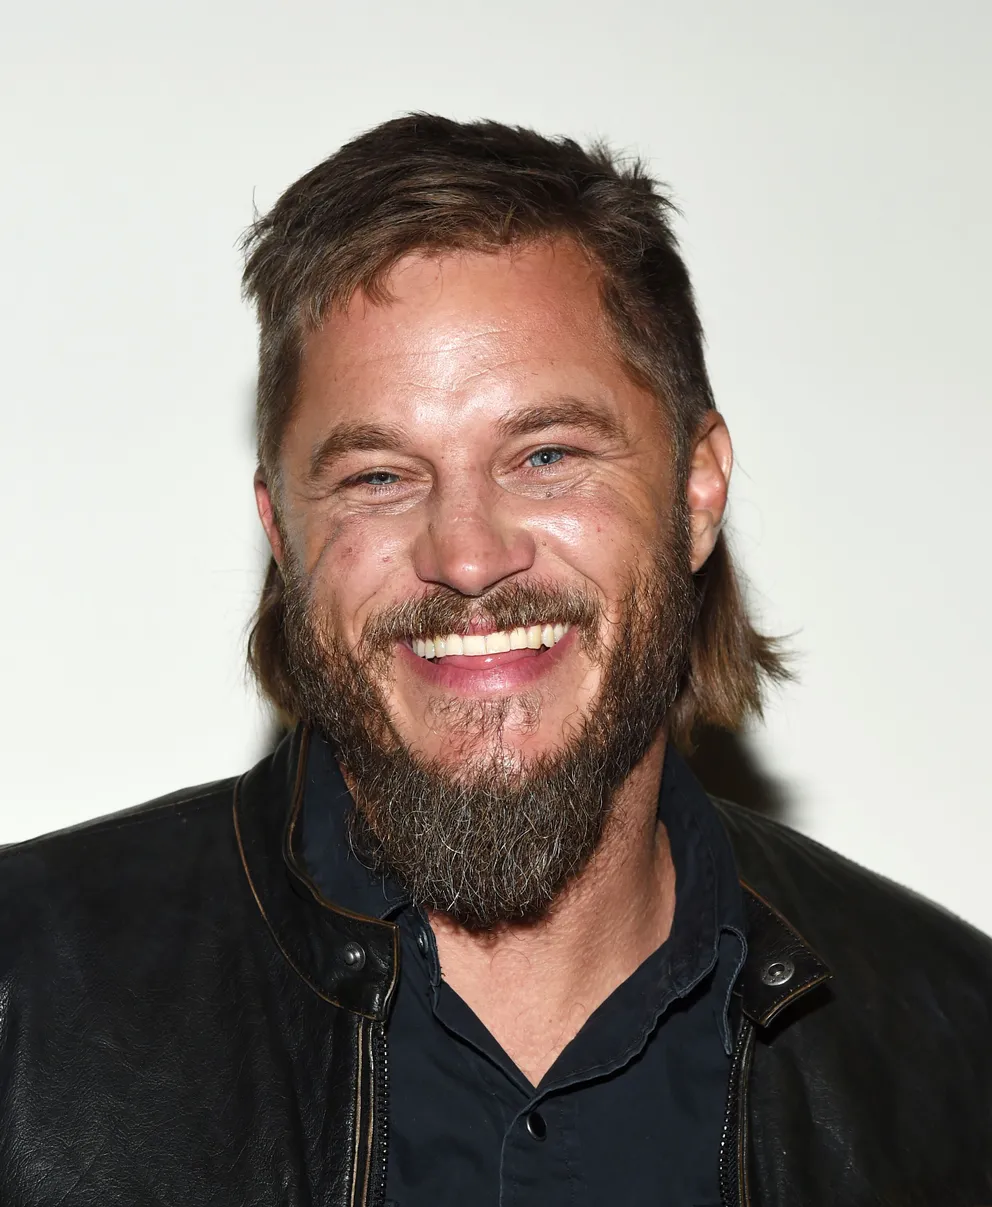 Travis Fimmel attends the "Finding Steve McQueen" Los Angeles special screening and Q&A at ArcLight Hollywood on March 11, 2019 in Hollywood, California | Photo: Getty Images